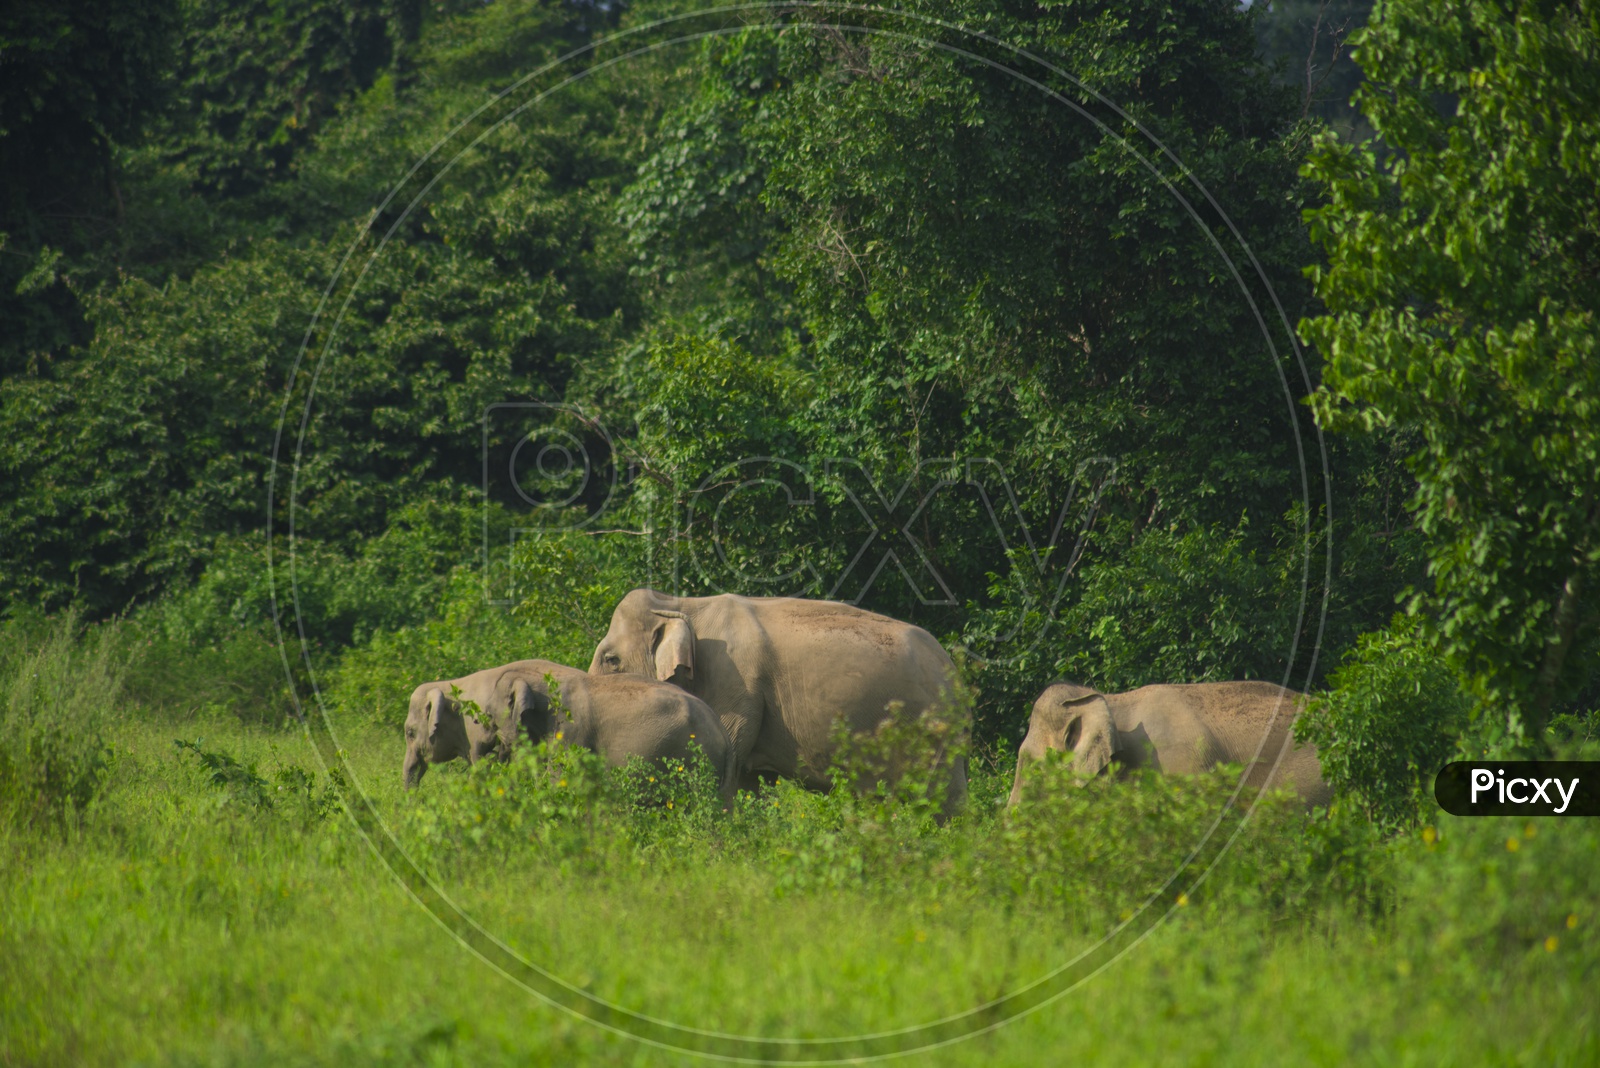 wild Asian elephants in the deep tropical forests Of Kui Buri National Park